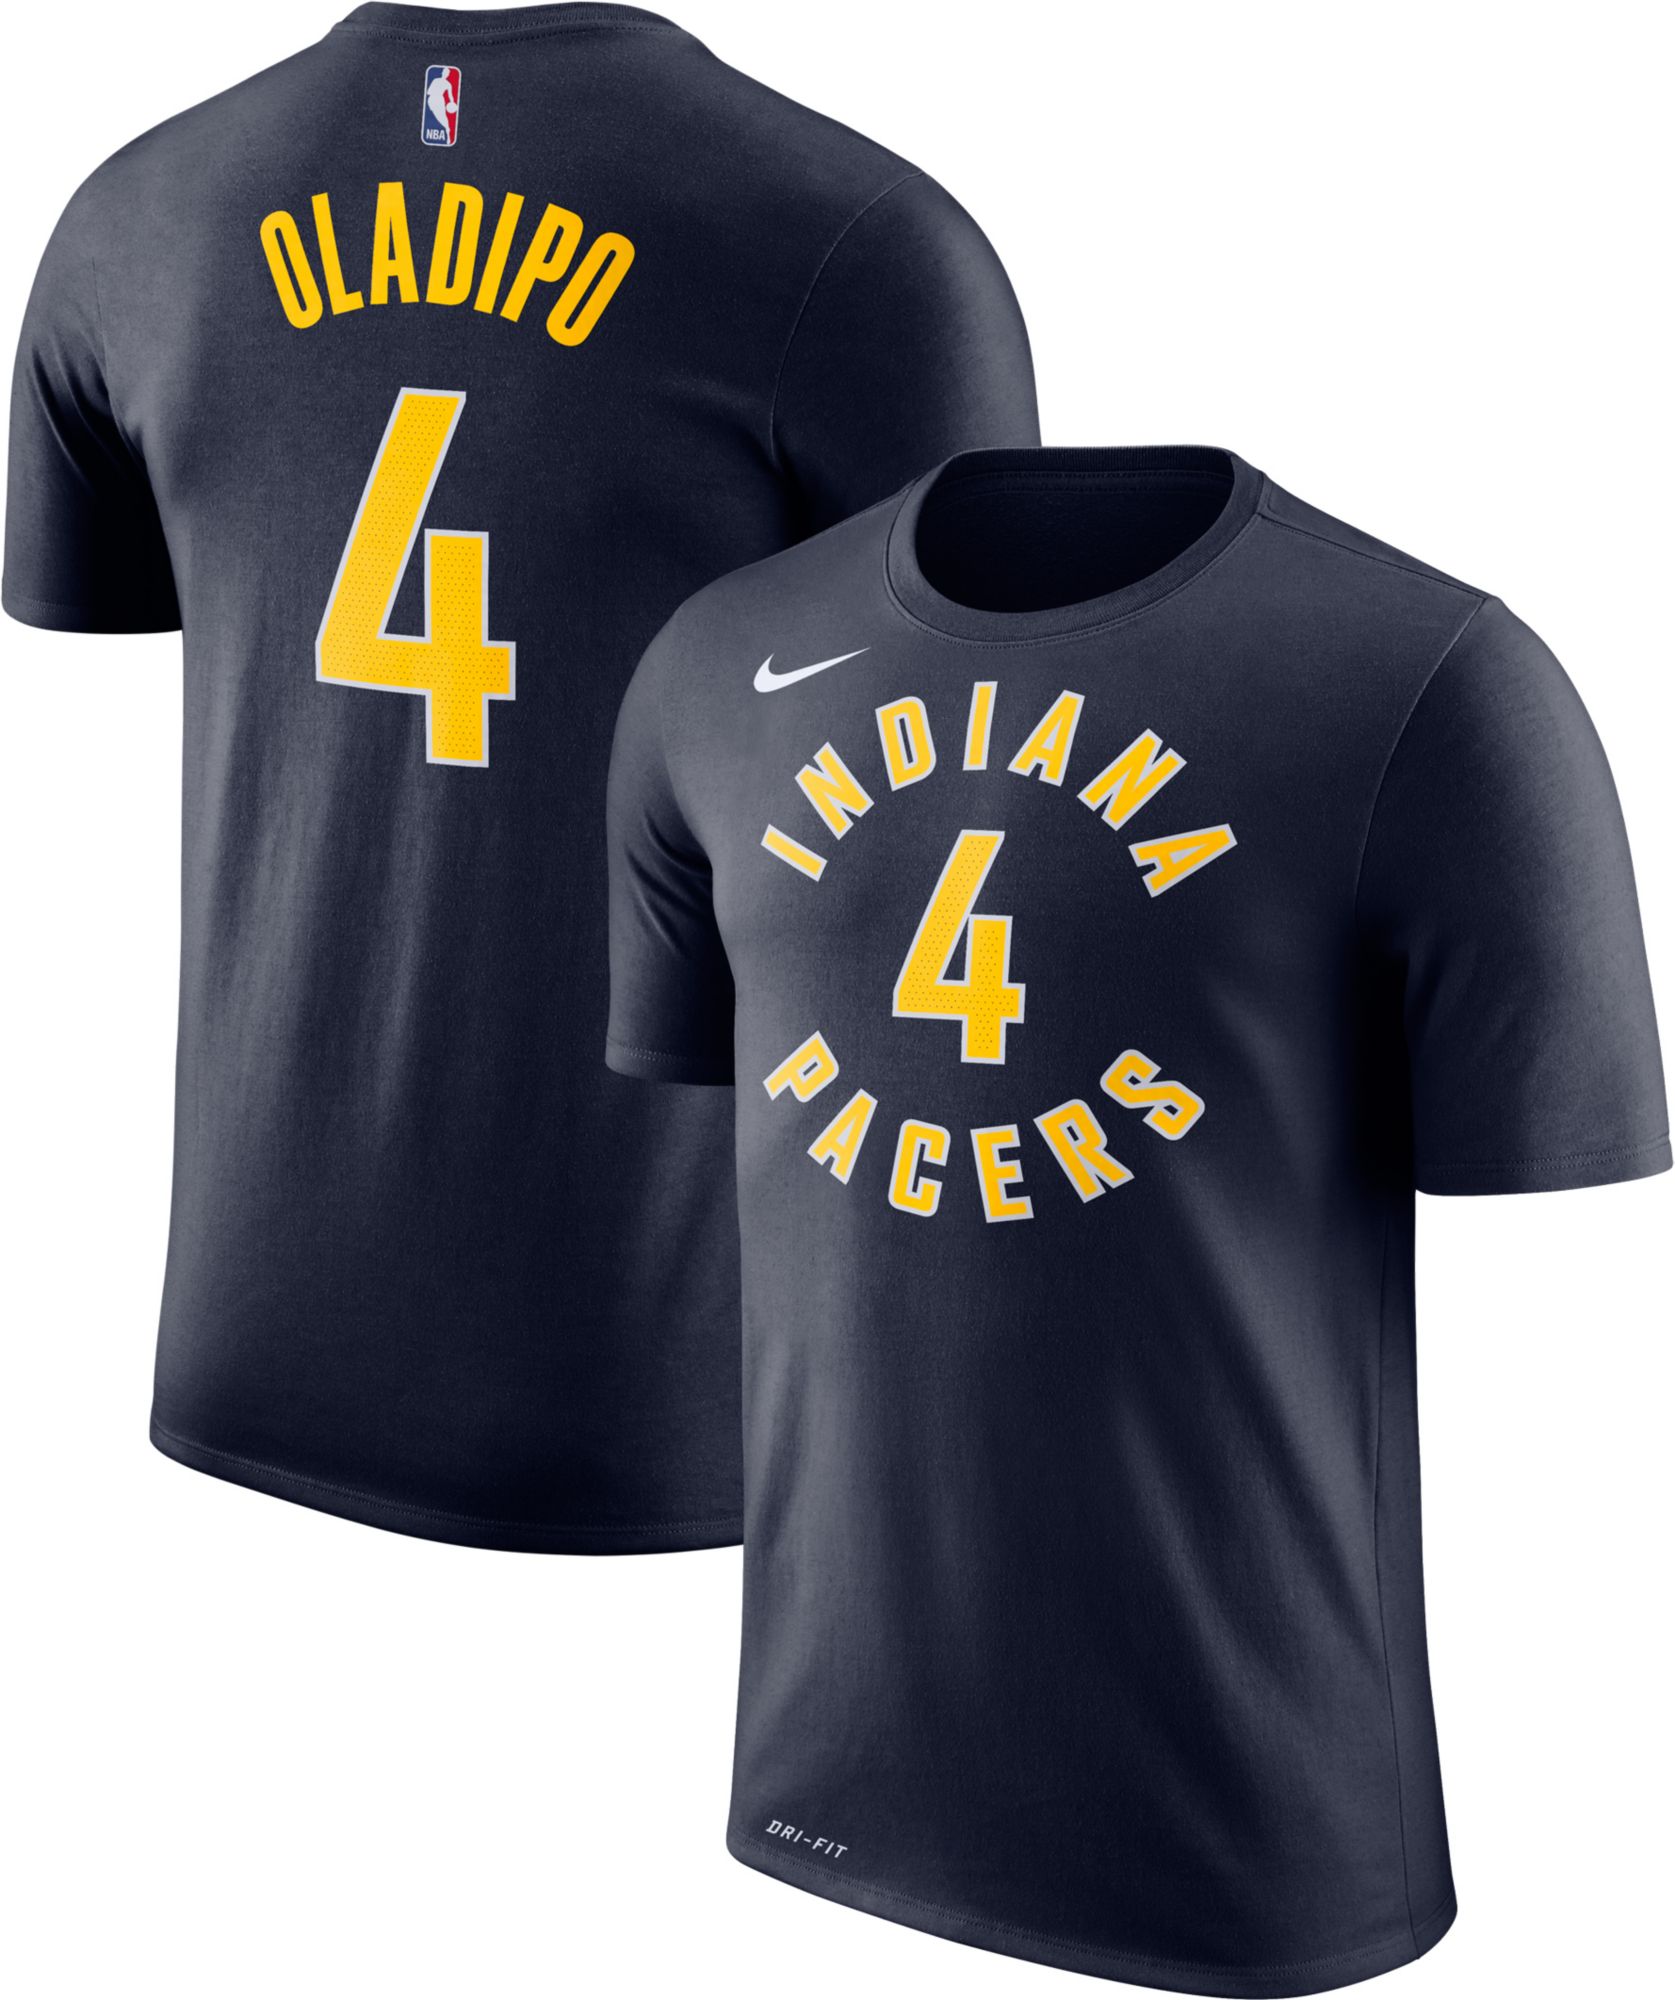 pacers shirt